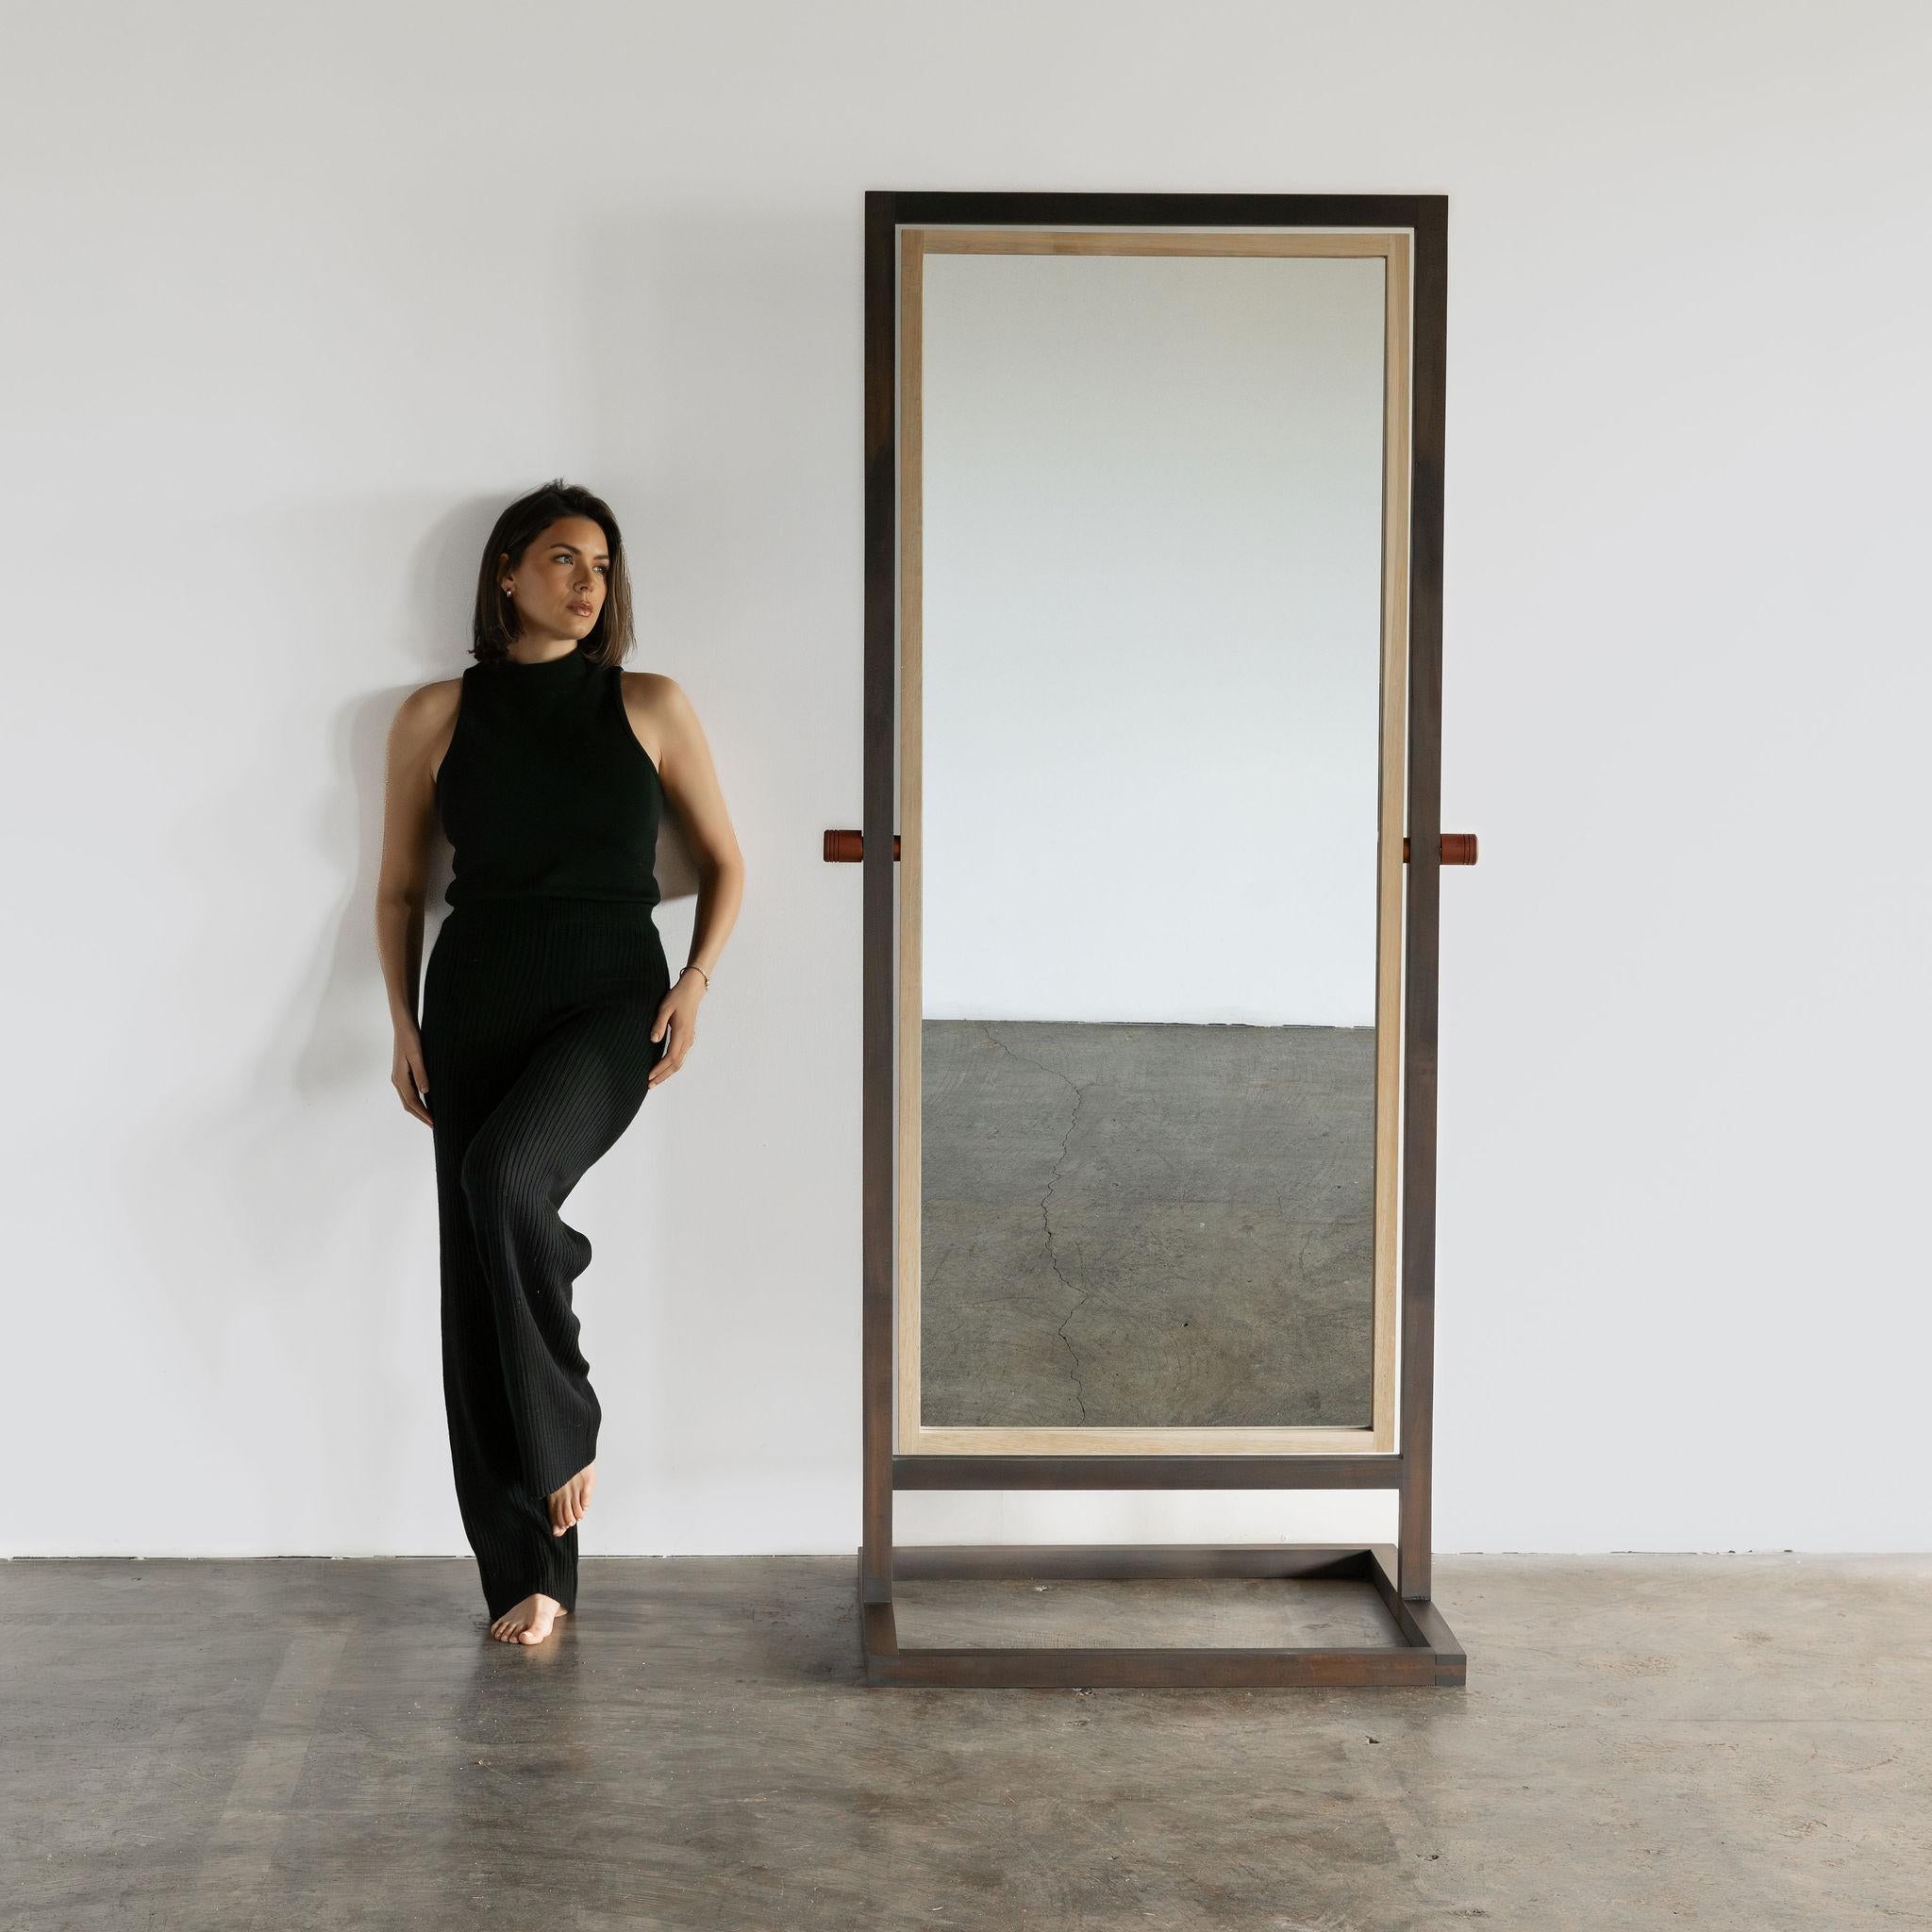 Meet Junction, our lovely floor standing mirror. With the twist of two knobs, her viewing angle can be adjusted to any position. You're beautiful, she's beautiful, we're all beautiful.

Shown in Oak, Walnut and Mahogany. 

ALl pieces hand made in